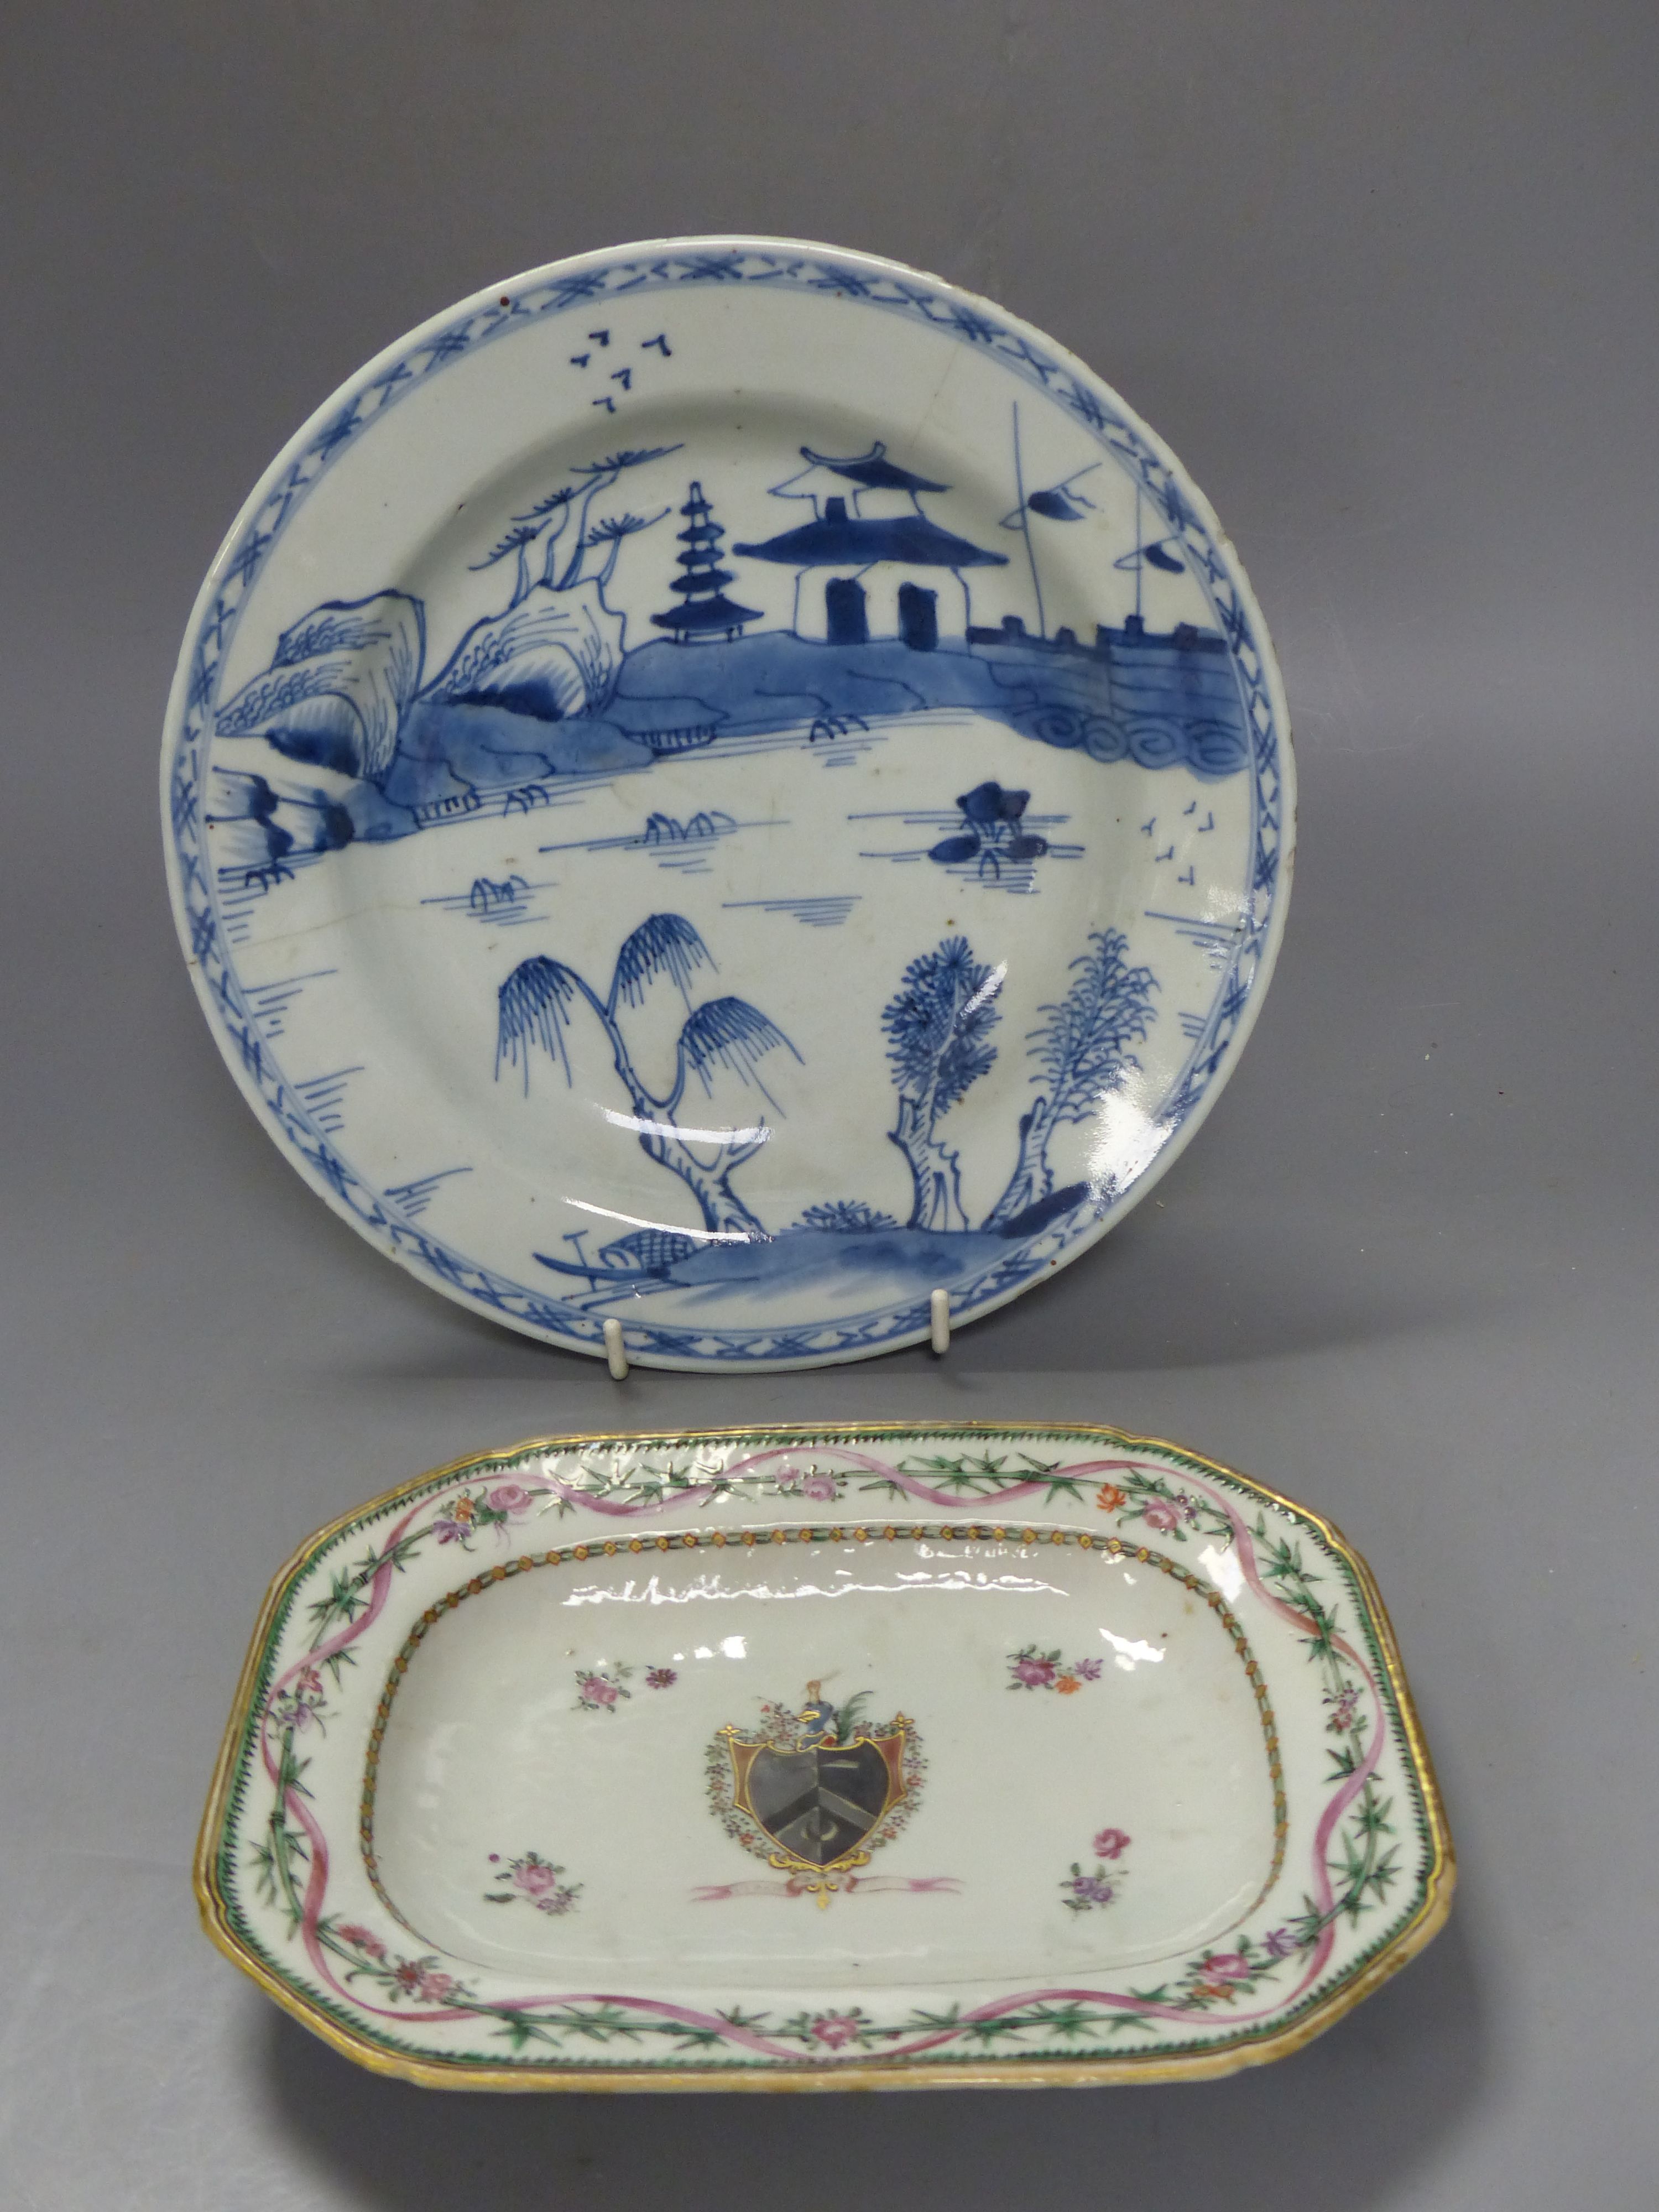 A Chinese export armorial dish, of Alexander of Boghall, near Edinburgh, and a Chinese blue and white dish, both Qianlong period, large